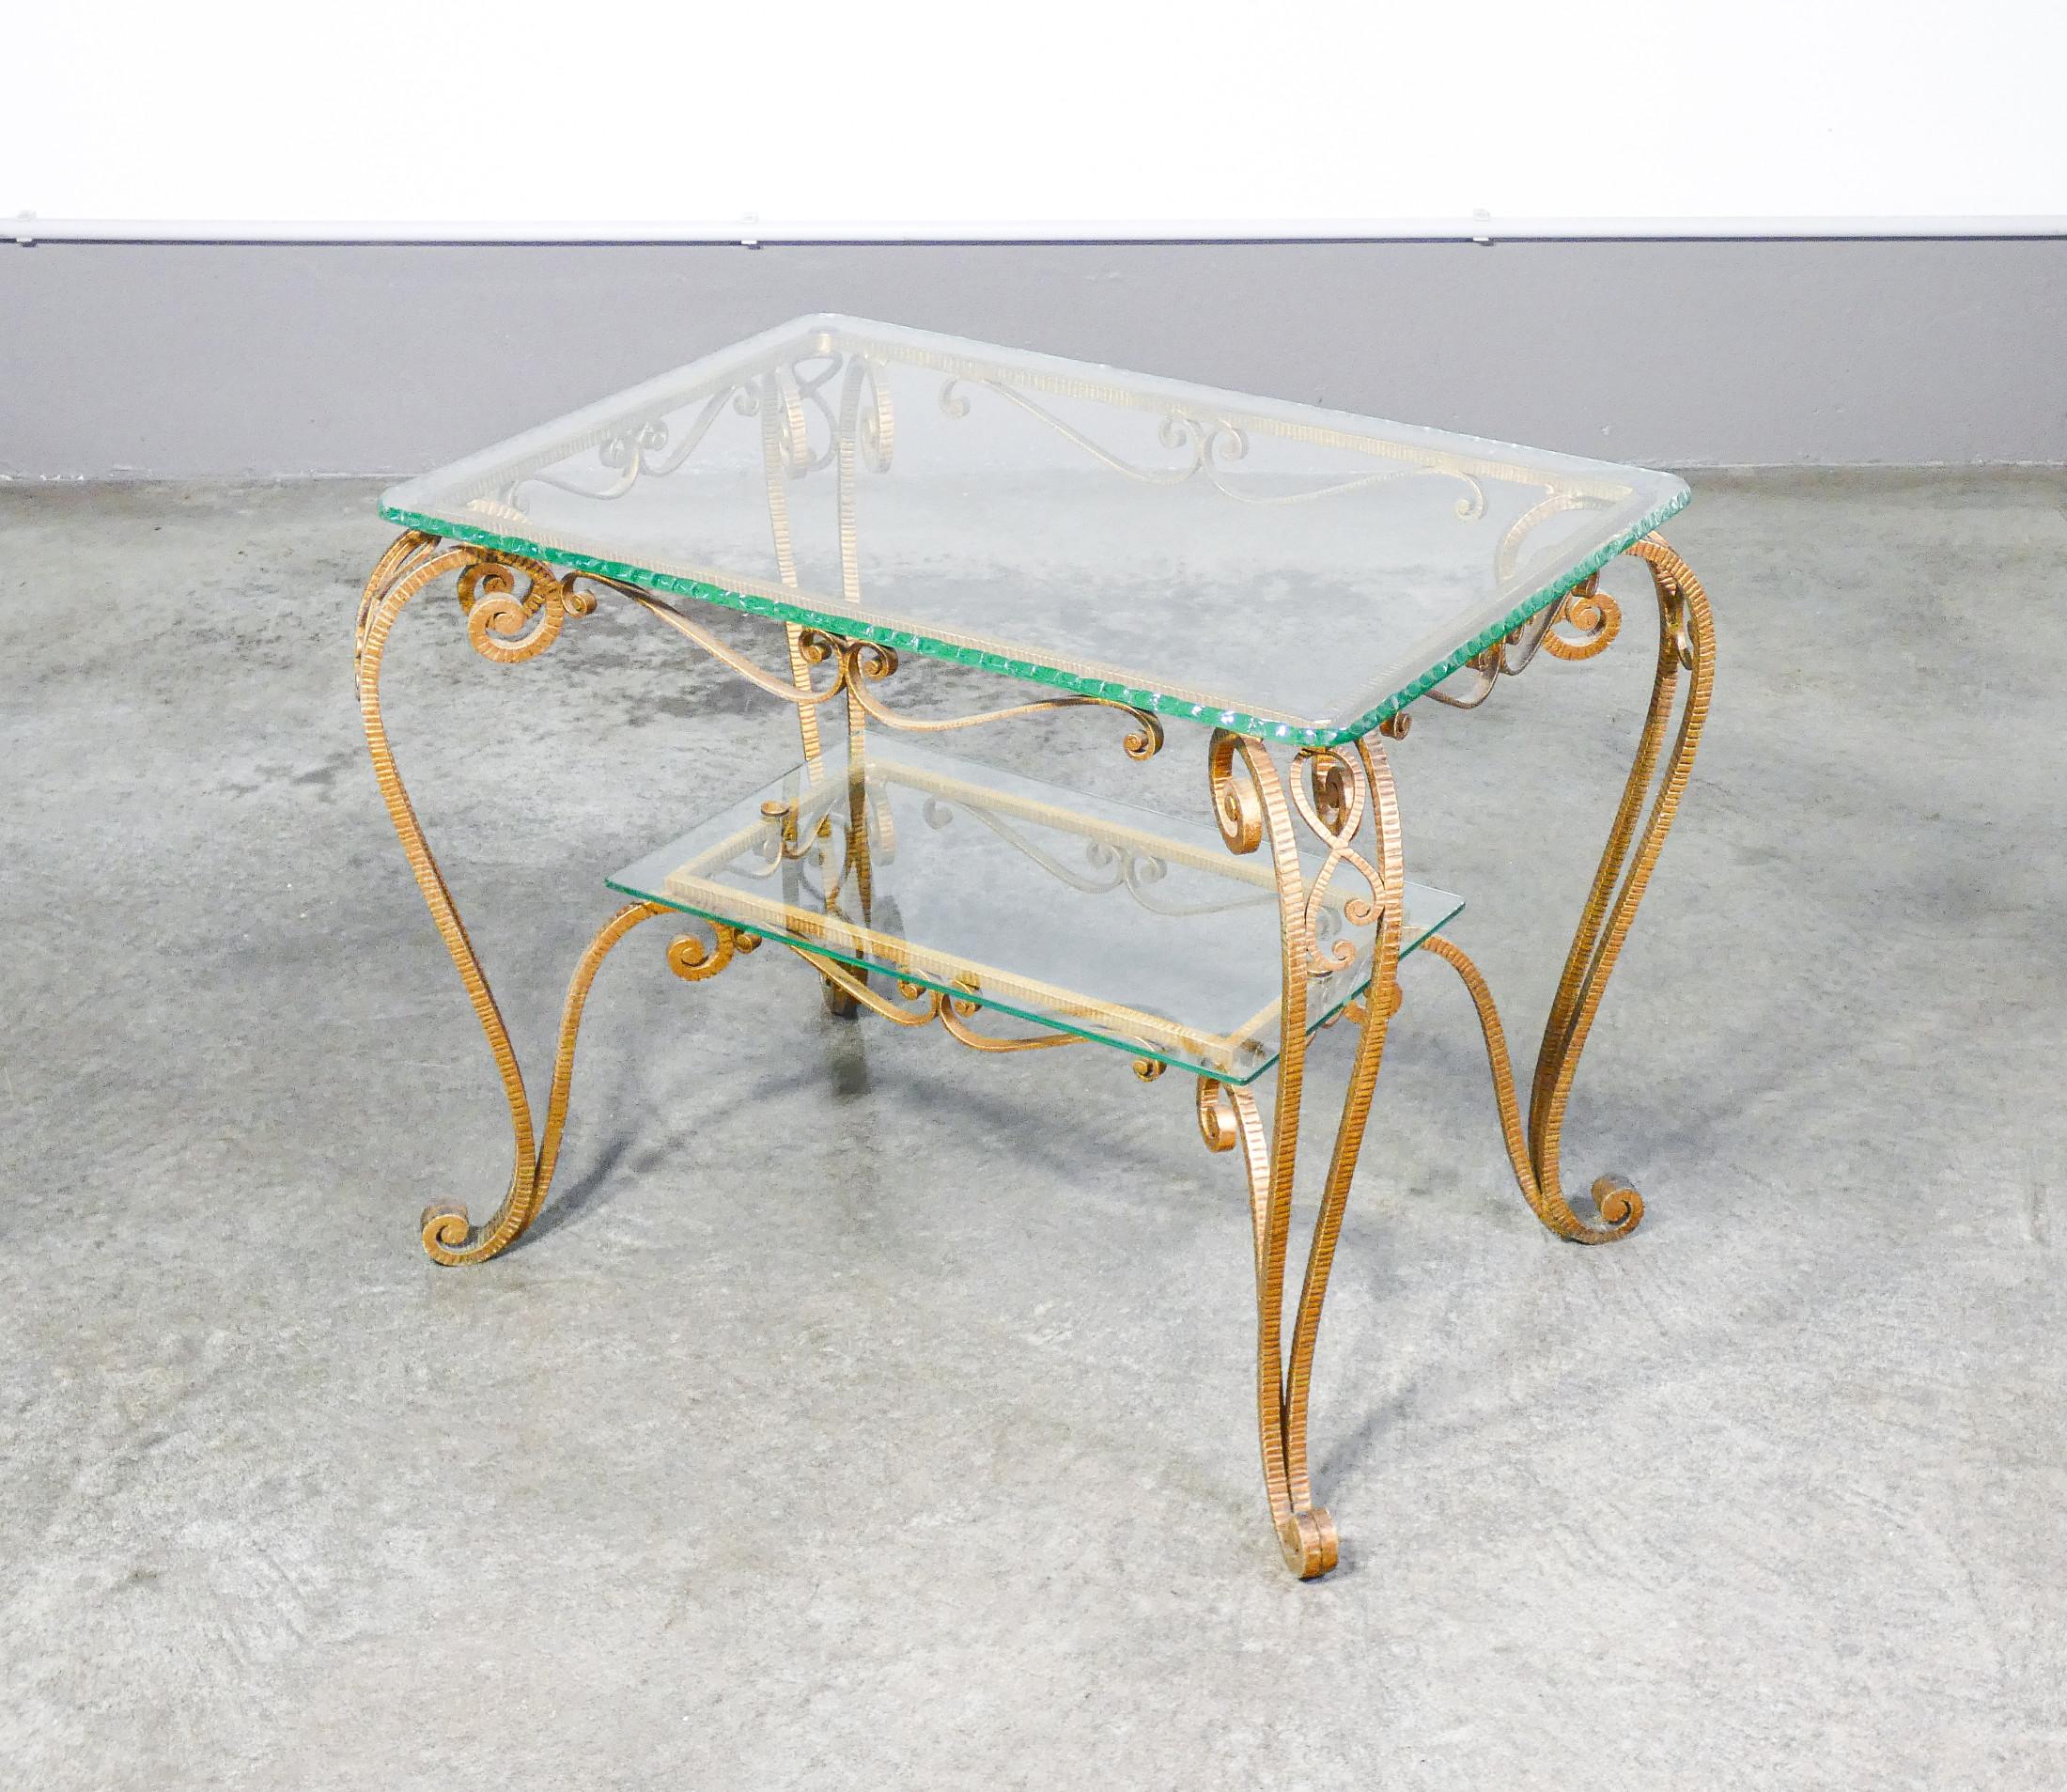 _ Low side table
design Pier Luigi COLLI,
gold-plated metal,
with two glass tops,
the upper with edge
chiseled.

ORIGIN
Italy

PERIOD
1950s

DESIGNER
PIER LUIGI COLLI (1895-1968) attended courses at the École des arts décoratifs in Paris and